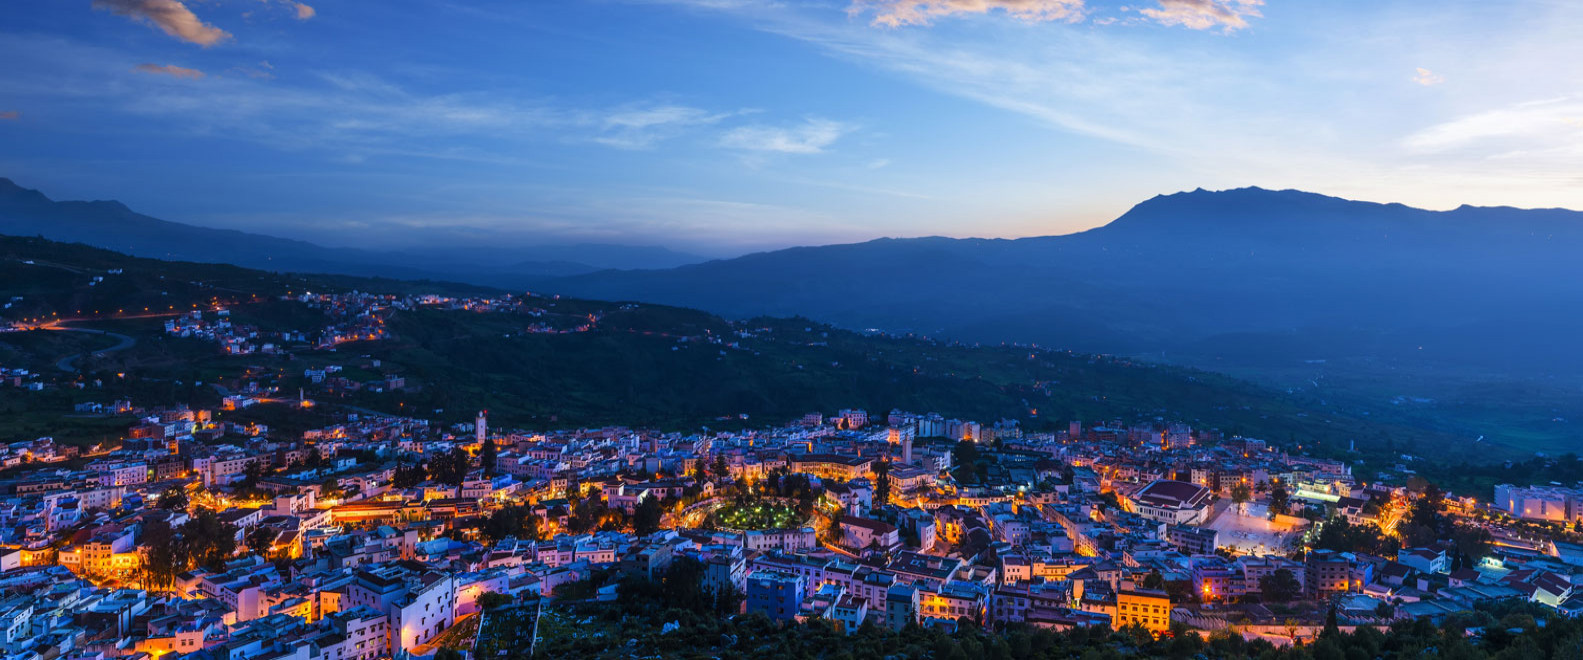 panorama-of-chefchaouen-with-buildings-painted-in-blue-color-morocco-yakthai_0